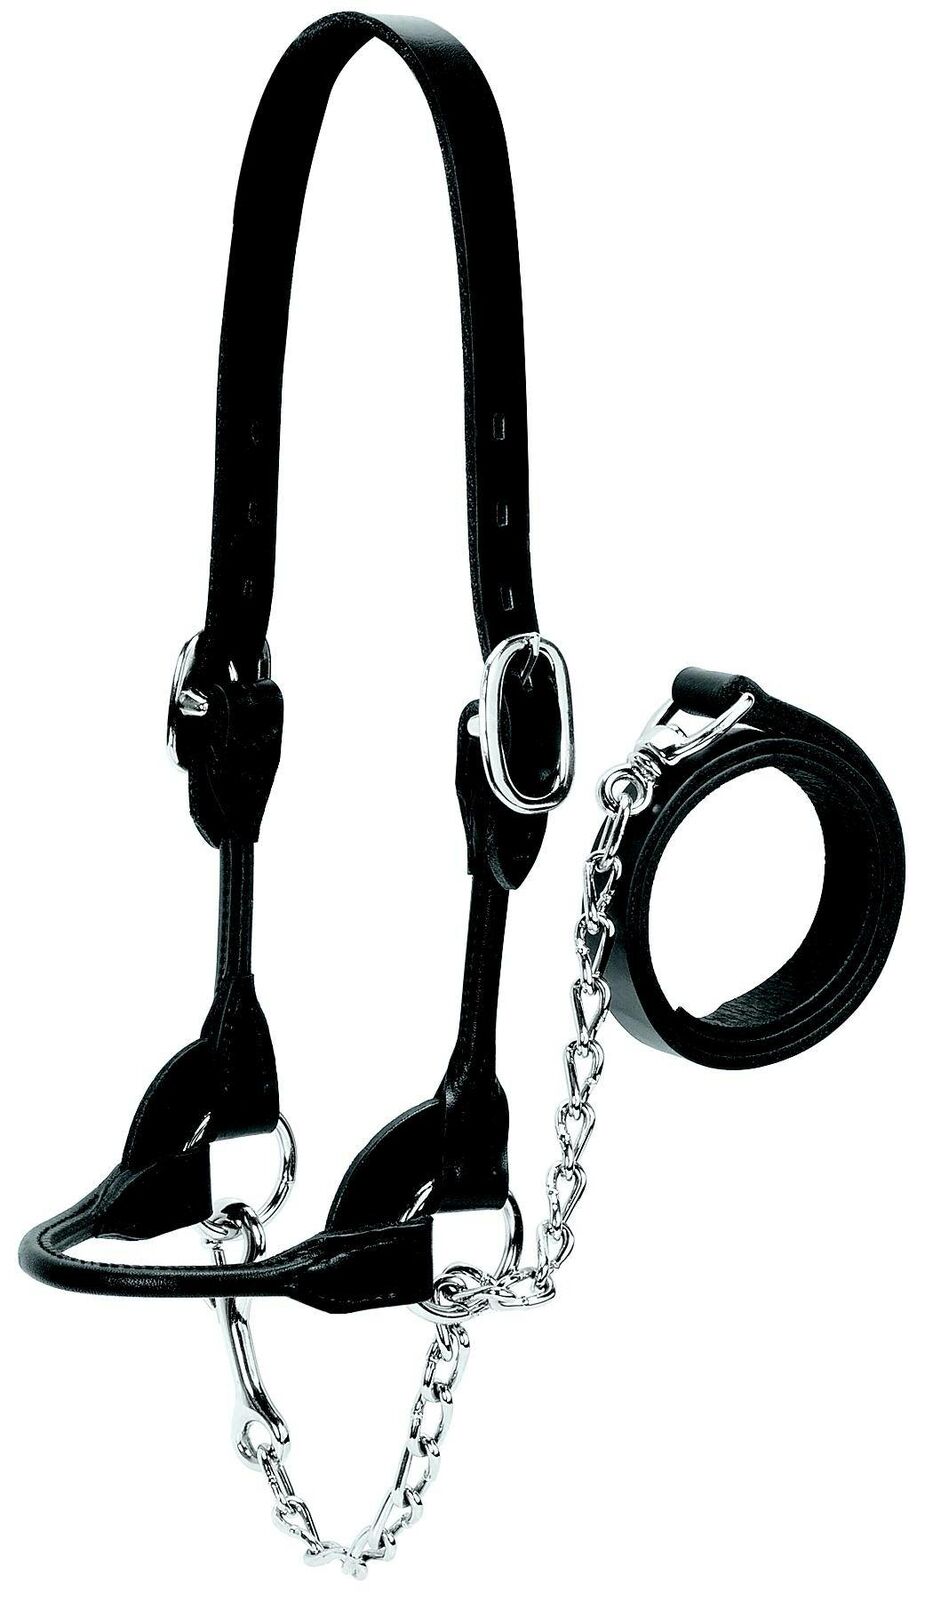 Weaver Leather Cattle Rounded Show Halter Large Black